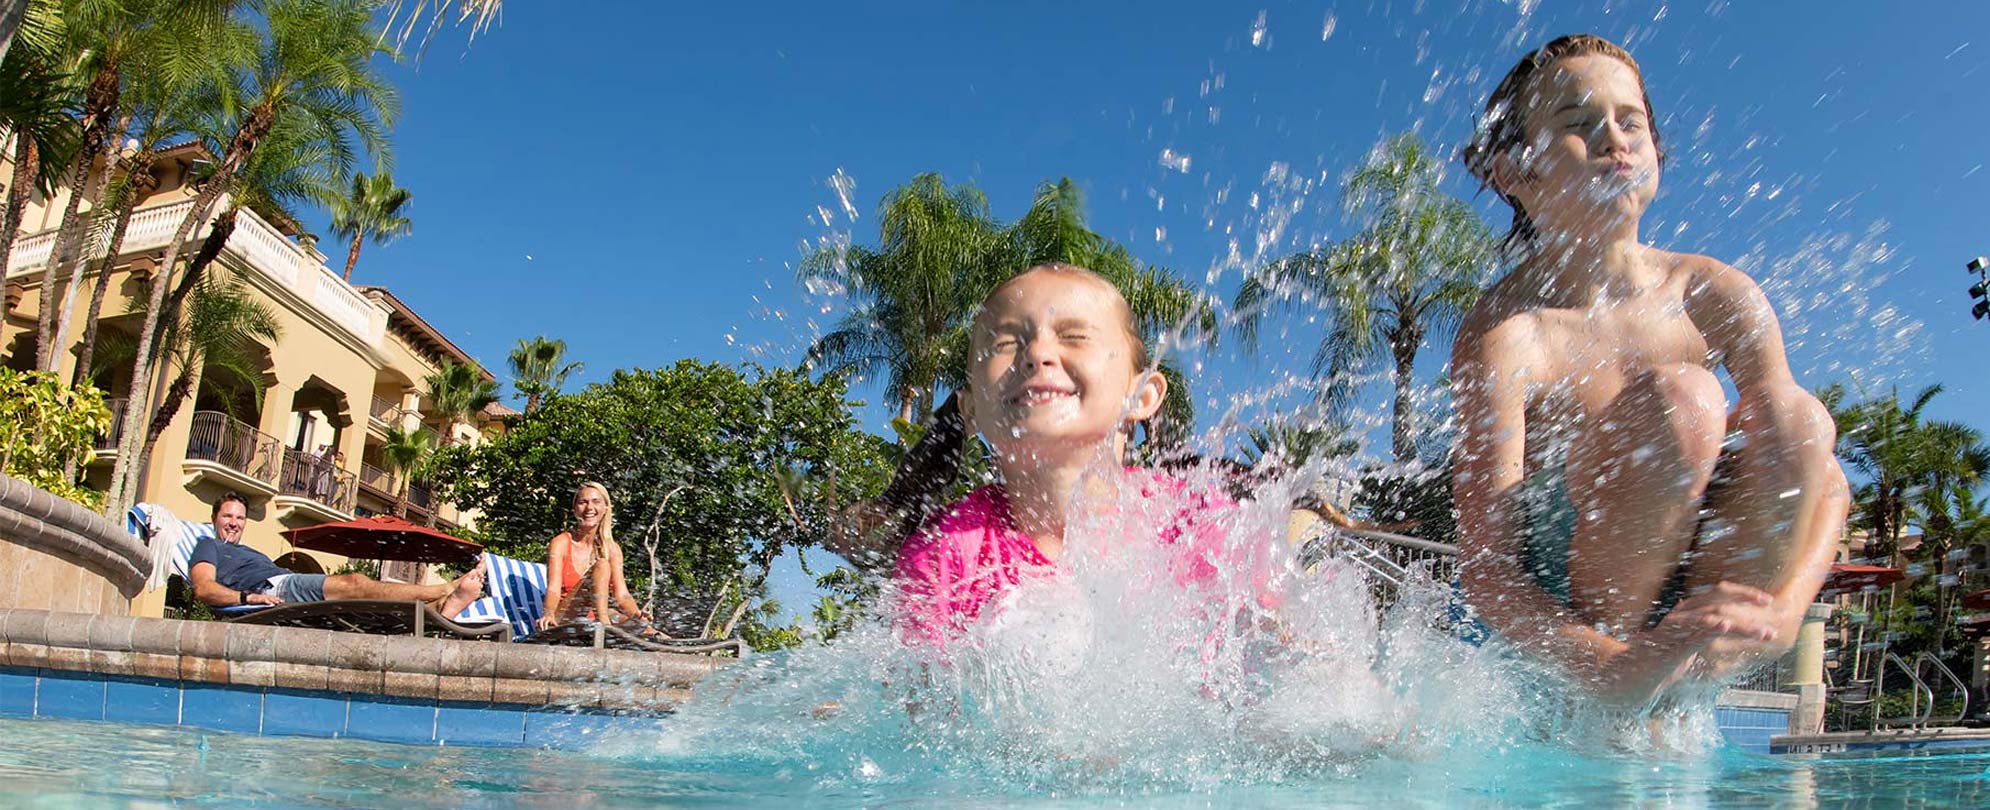 Smiling parents watch as their son and daughter jump and splash in the pool of their Club Wyndham timeshare resort.